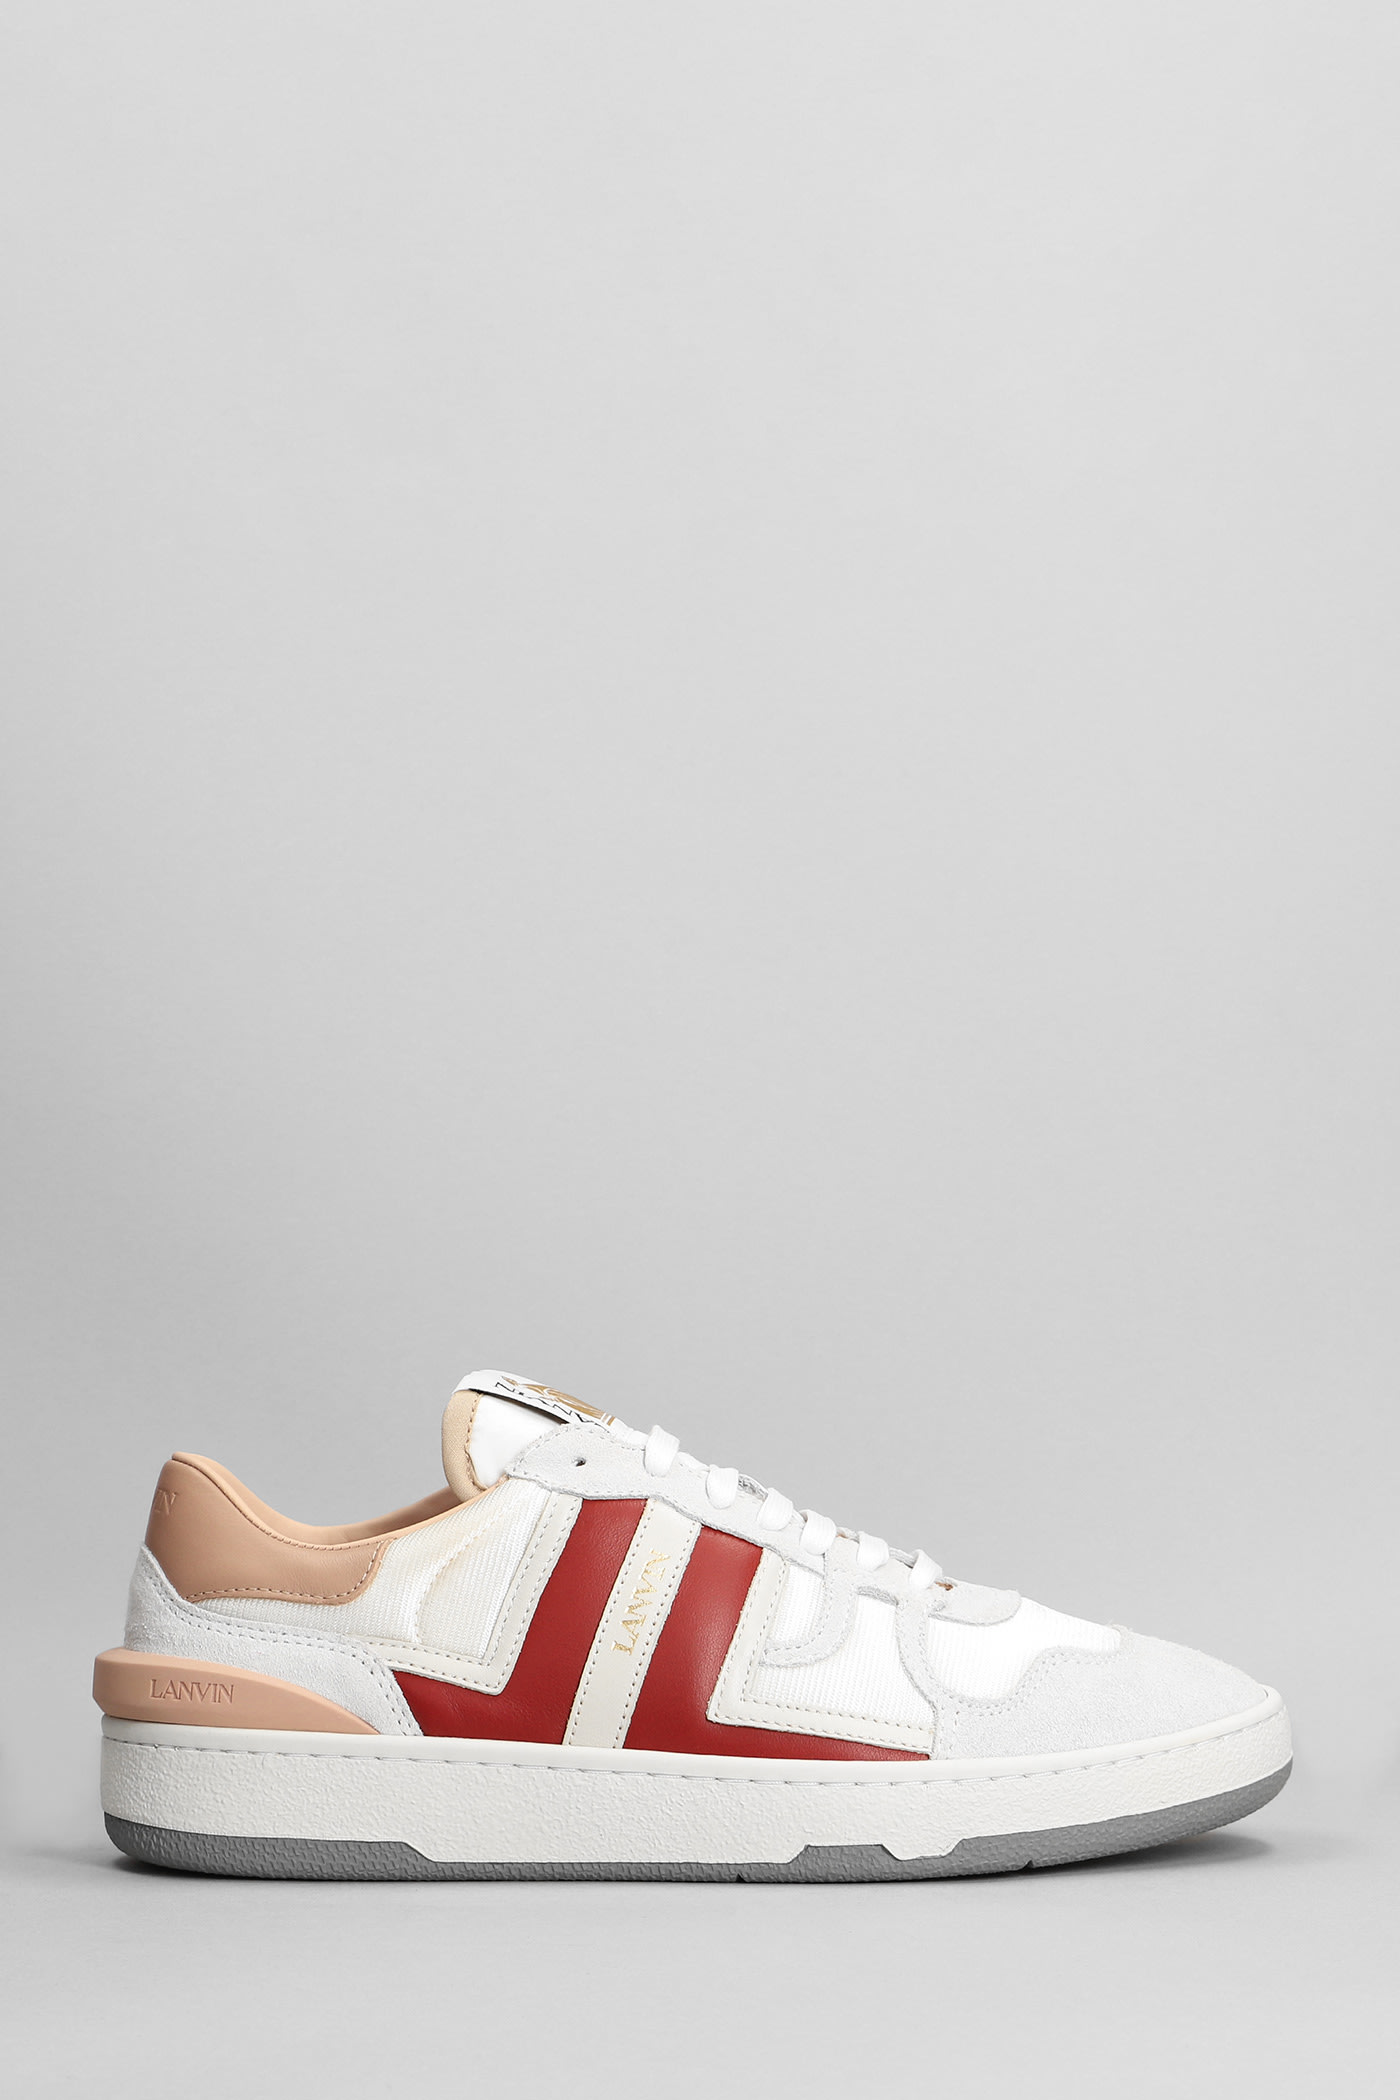 Lanvin Sneakers In Rose-pink Leather